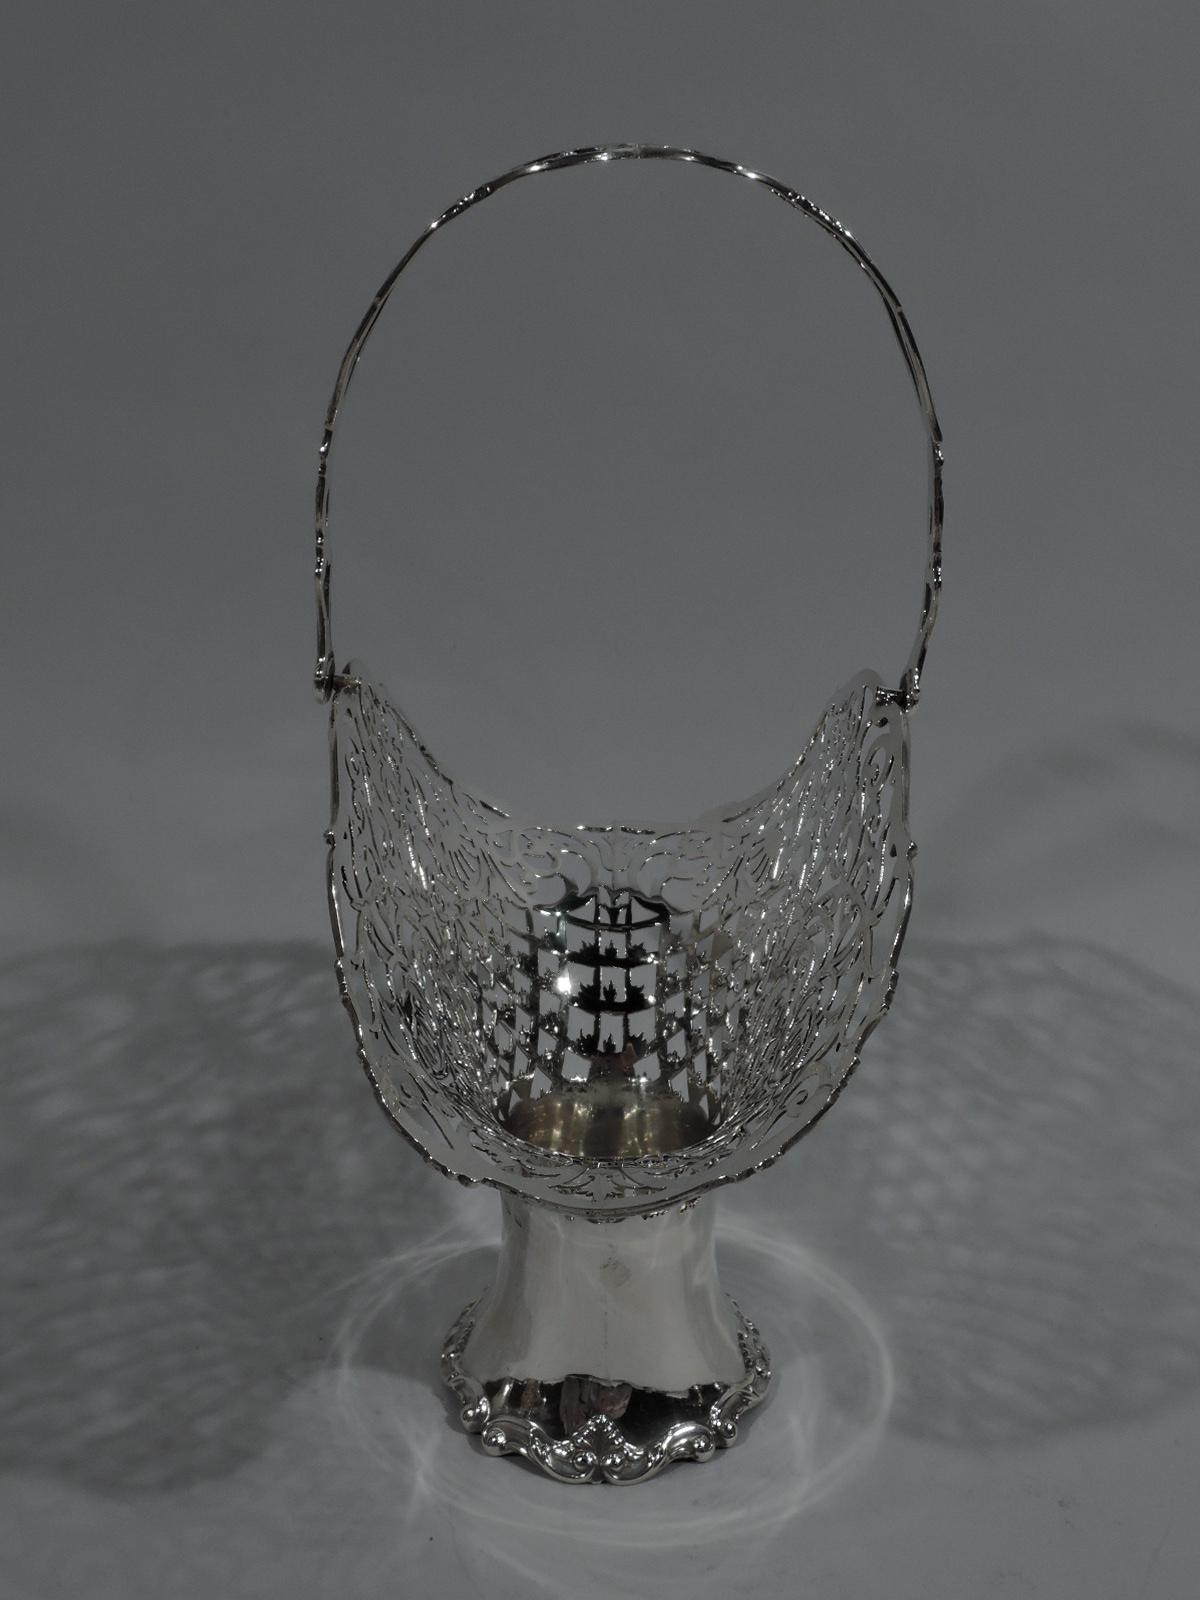 Edwardian sterling silver basket. Made by Henry Matthews in Birmingham in 1910. Solid and concave well with applied shell-and-scroll rim. Wide and flattened oval mouth with pierced and stylized scrollwork, flowers, leaves, and diaper. Symmetrical